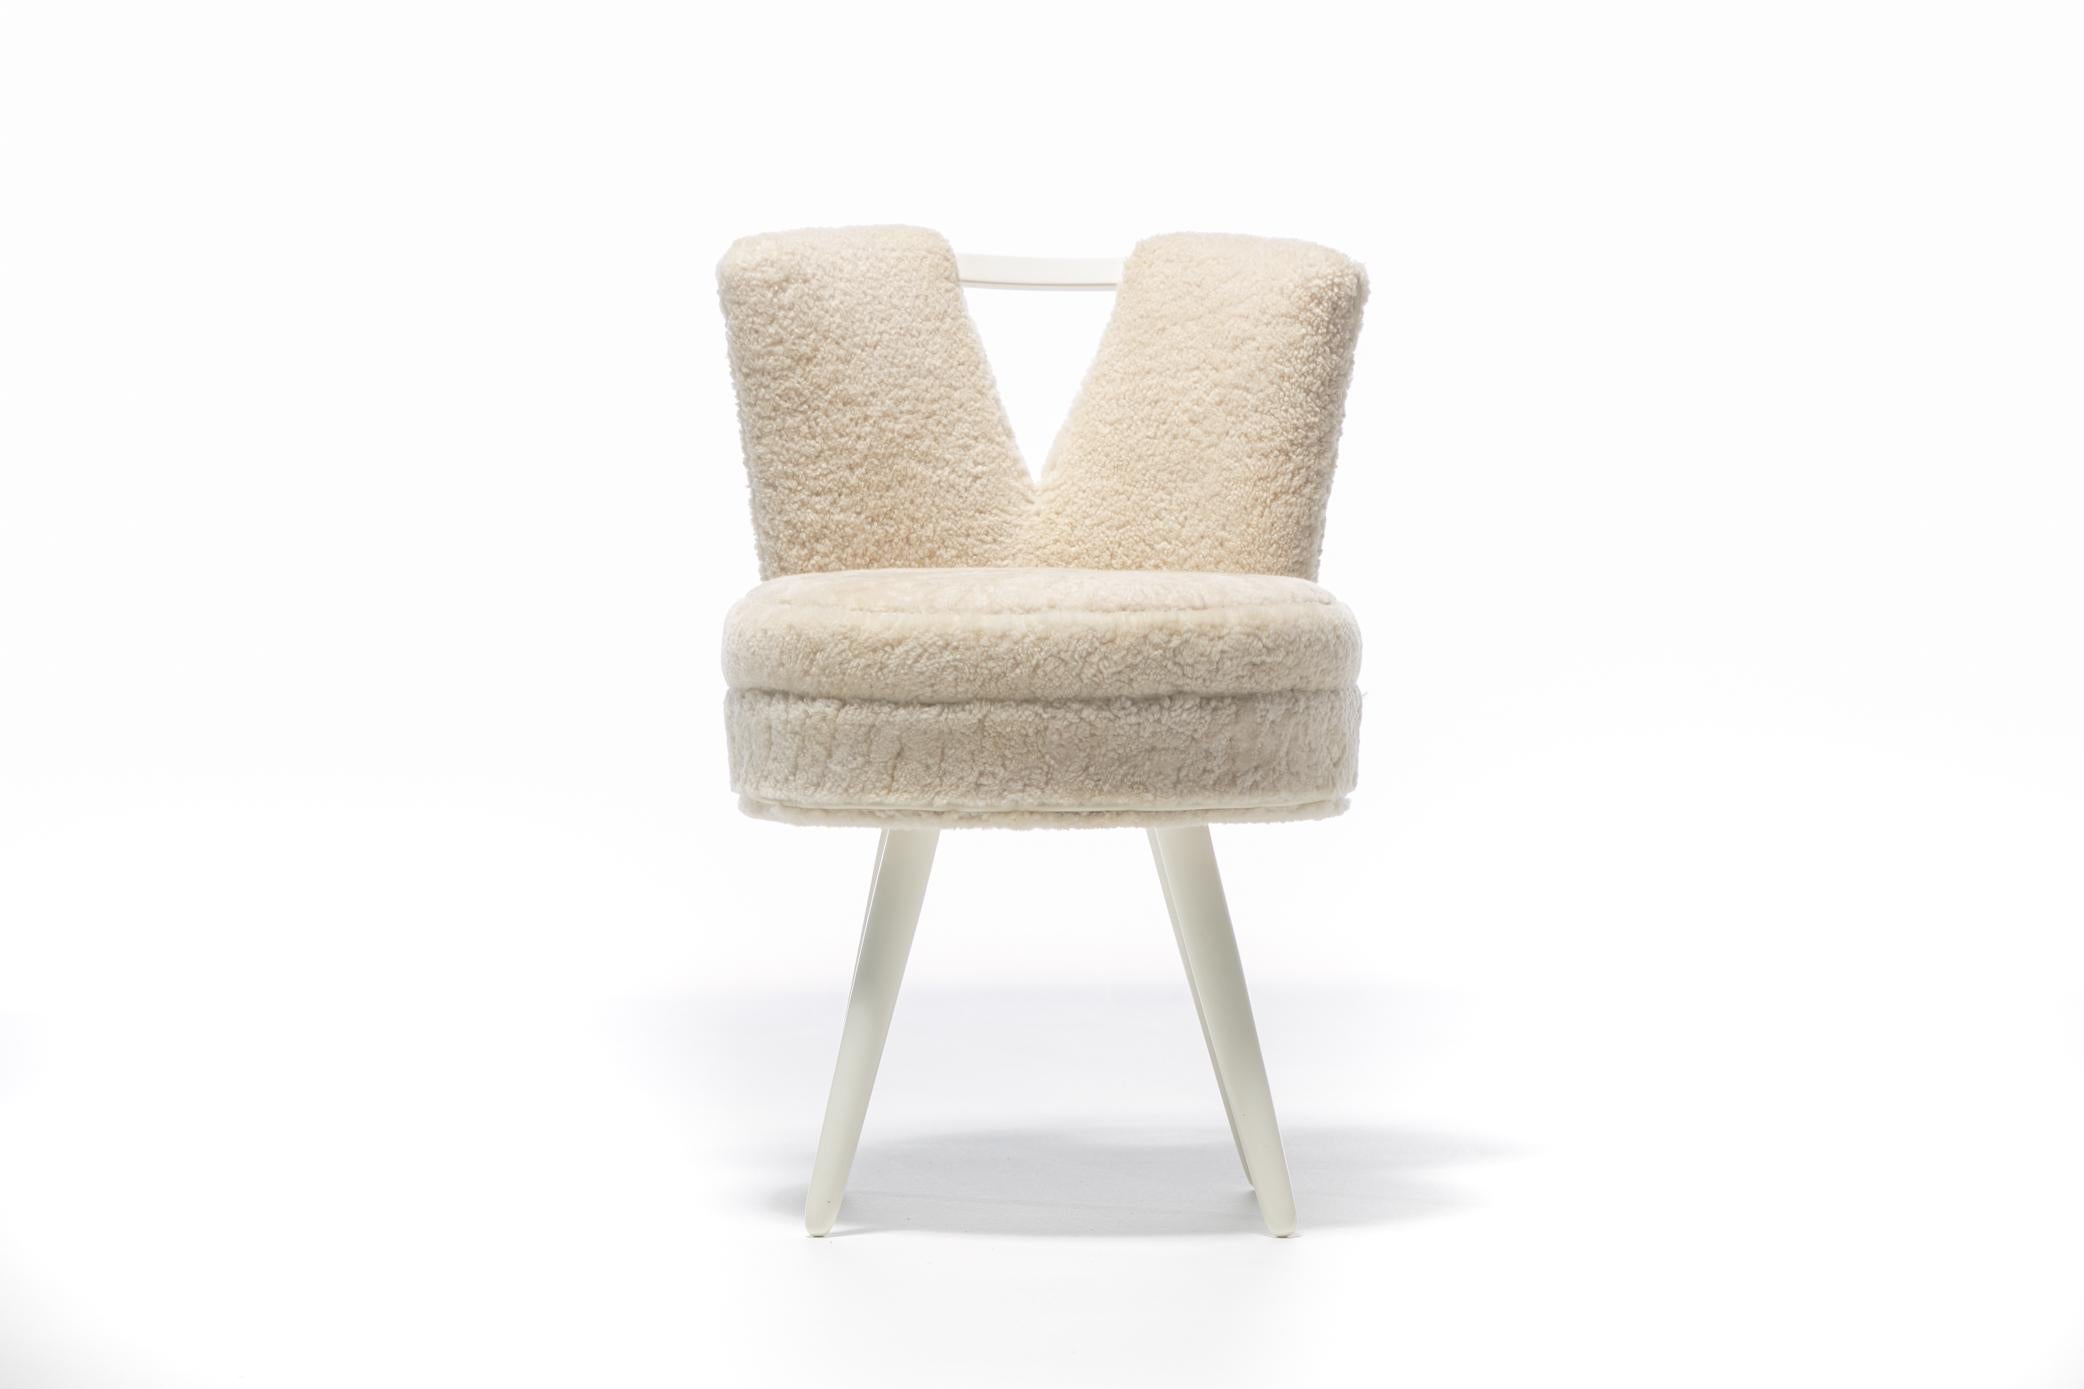 Custom Vanity Stool in Ivory Cream Shearling with Leather Trim 10